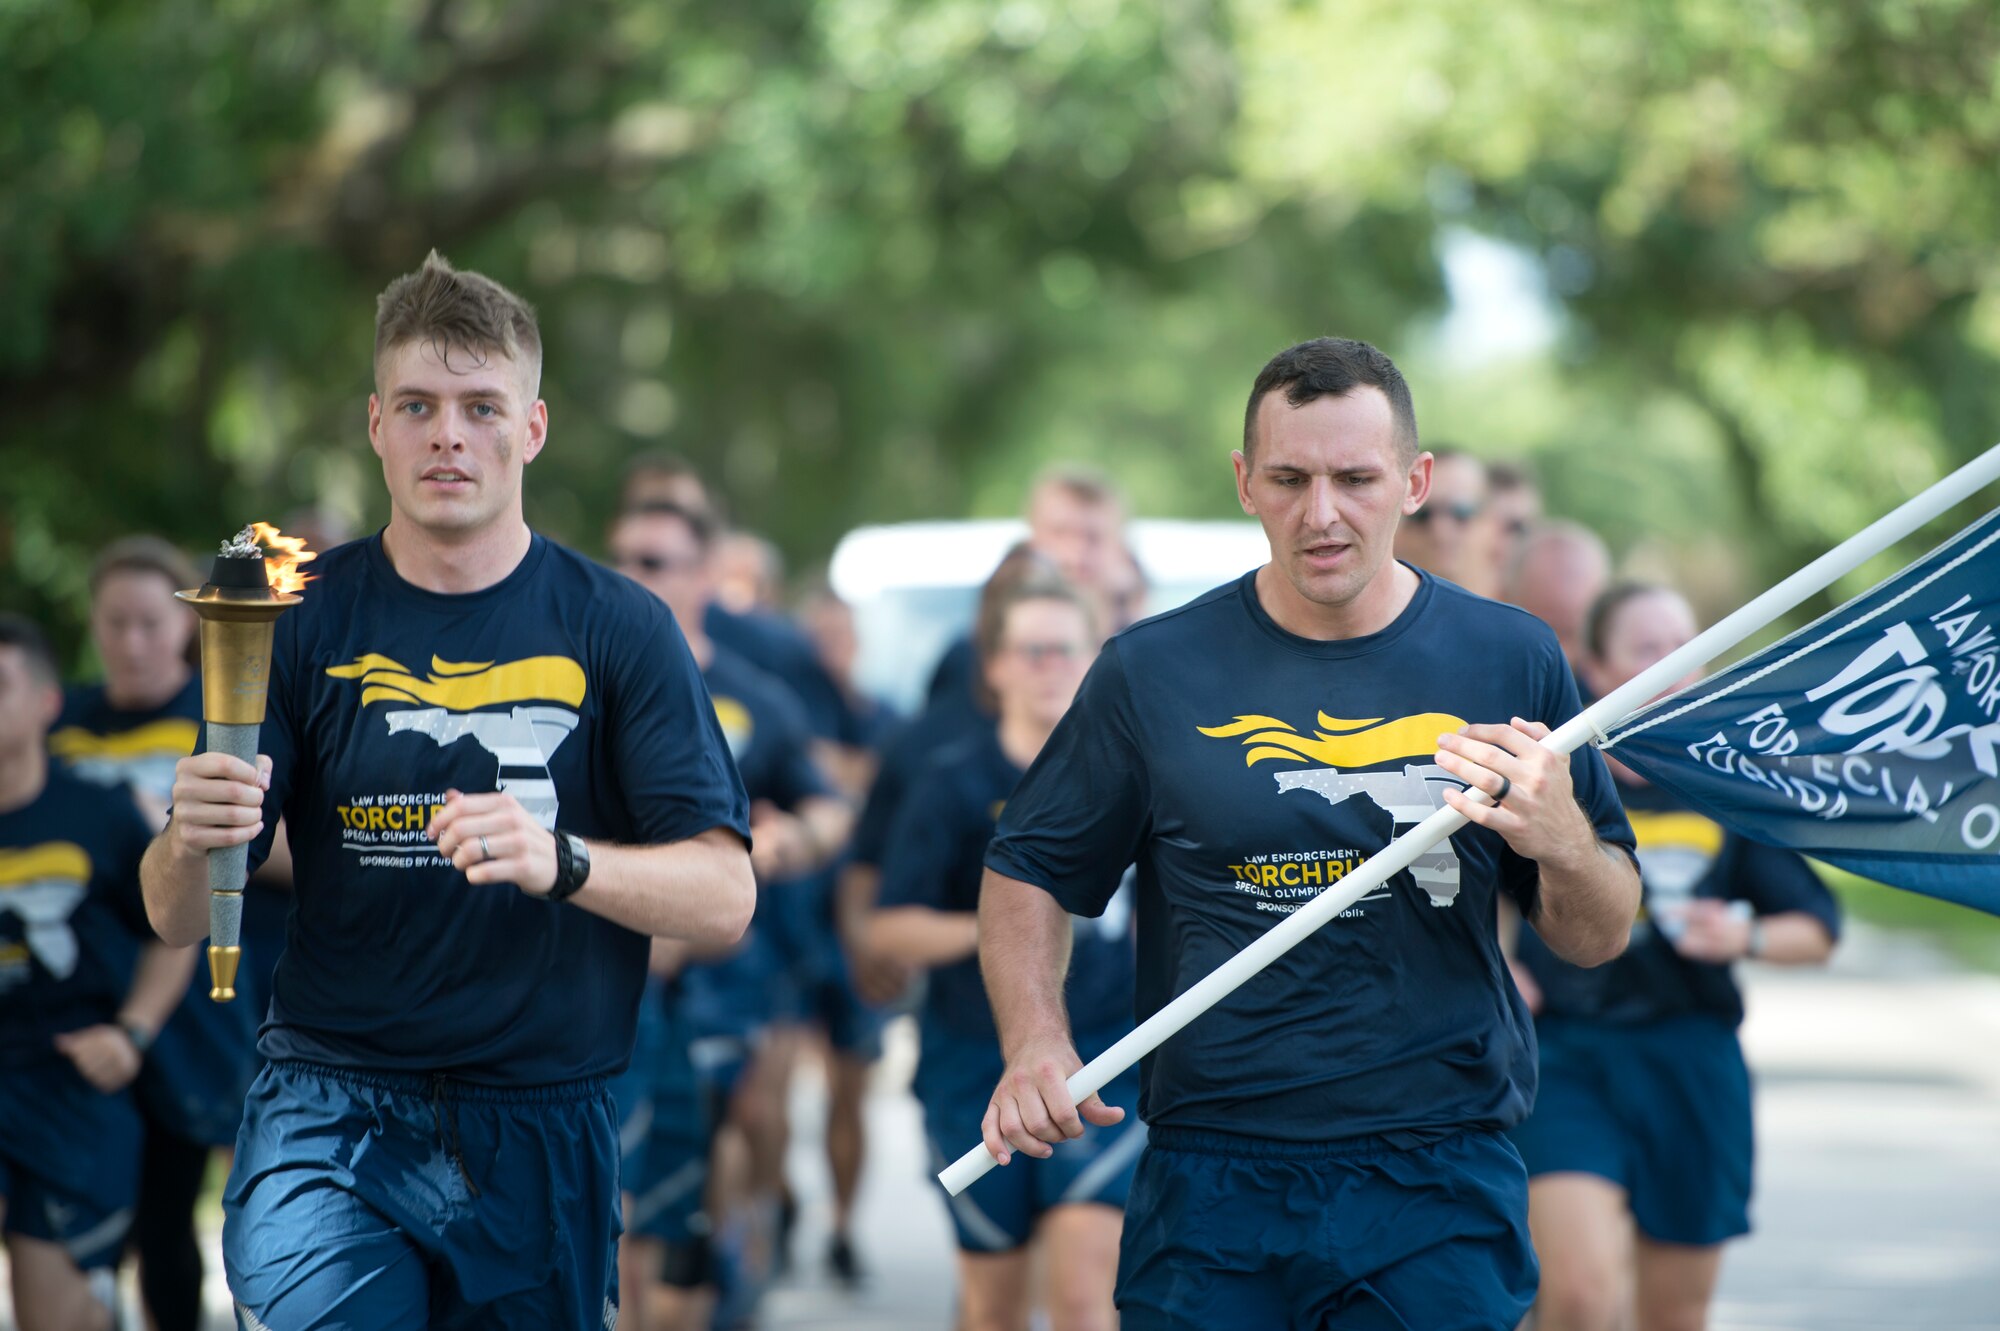 U.S. Air Force Airmen assigned to the 6th Security Forces Squadron participate in the 36th annual Florida Special Olympics Law Enforcement Torch Run May 2, 2019 at MacDill Air Force Base, Fla.